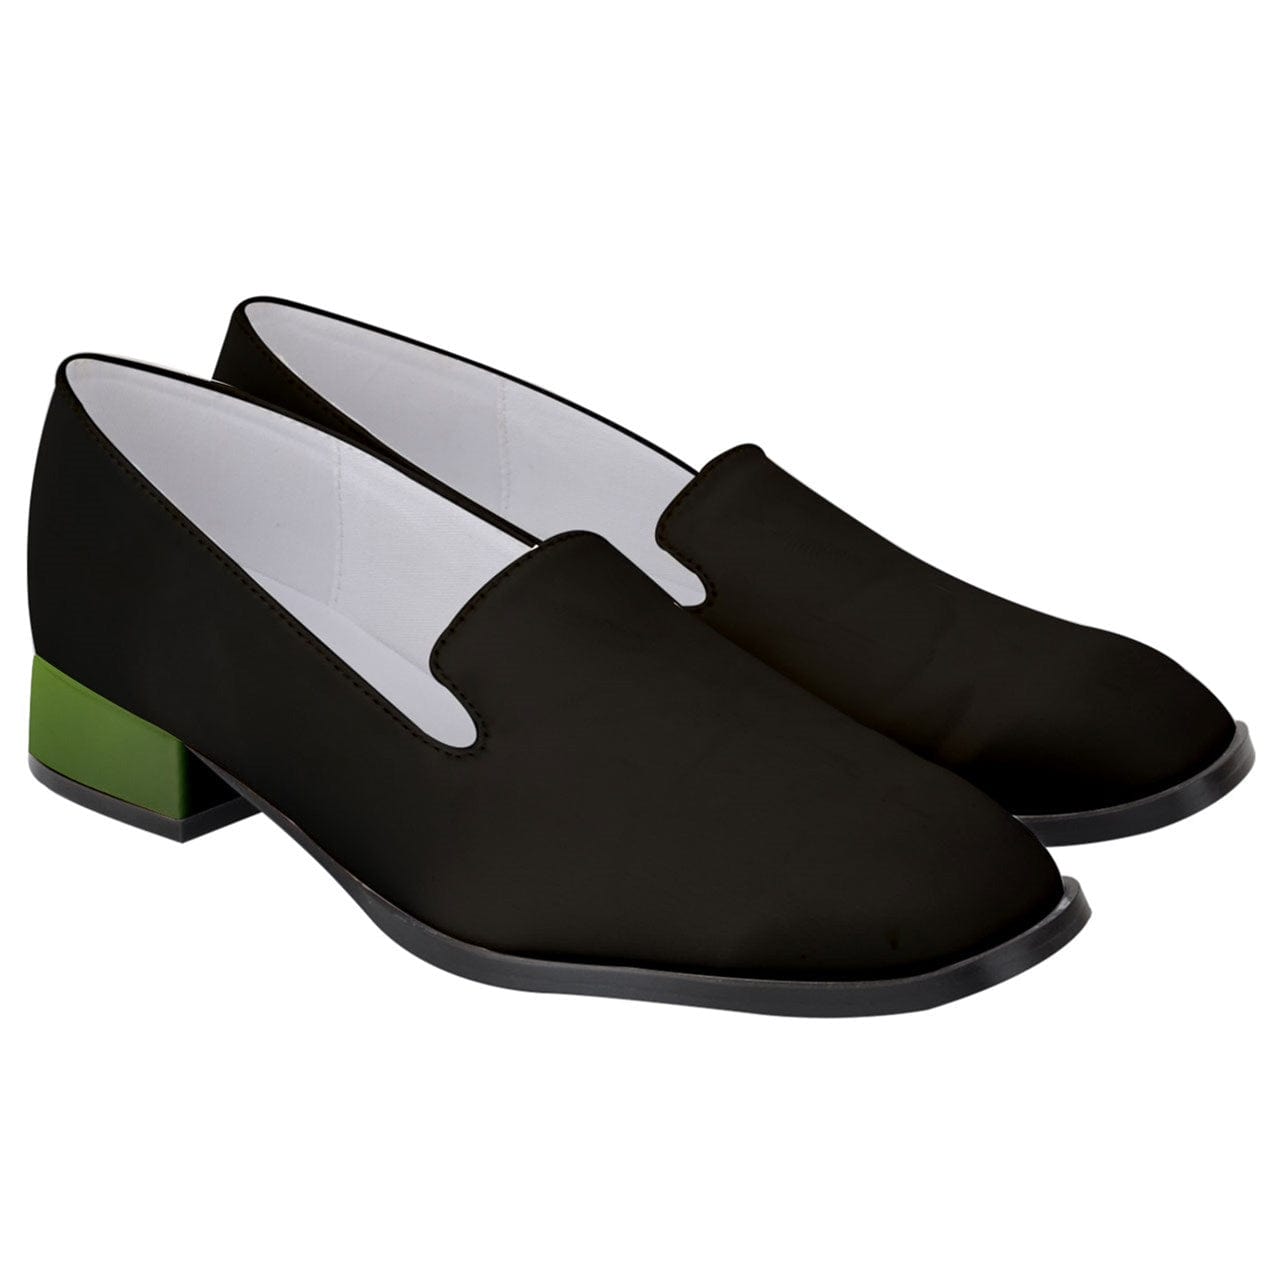 Classic Loafer Low Heels - Black and Green